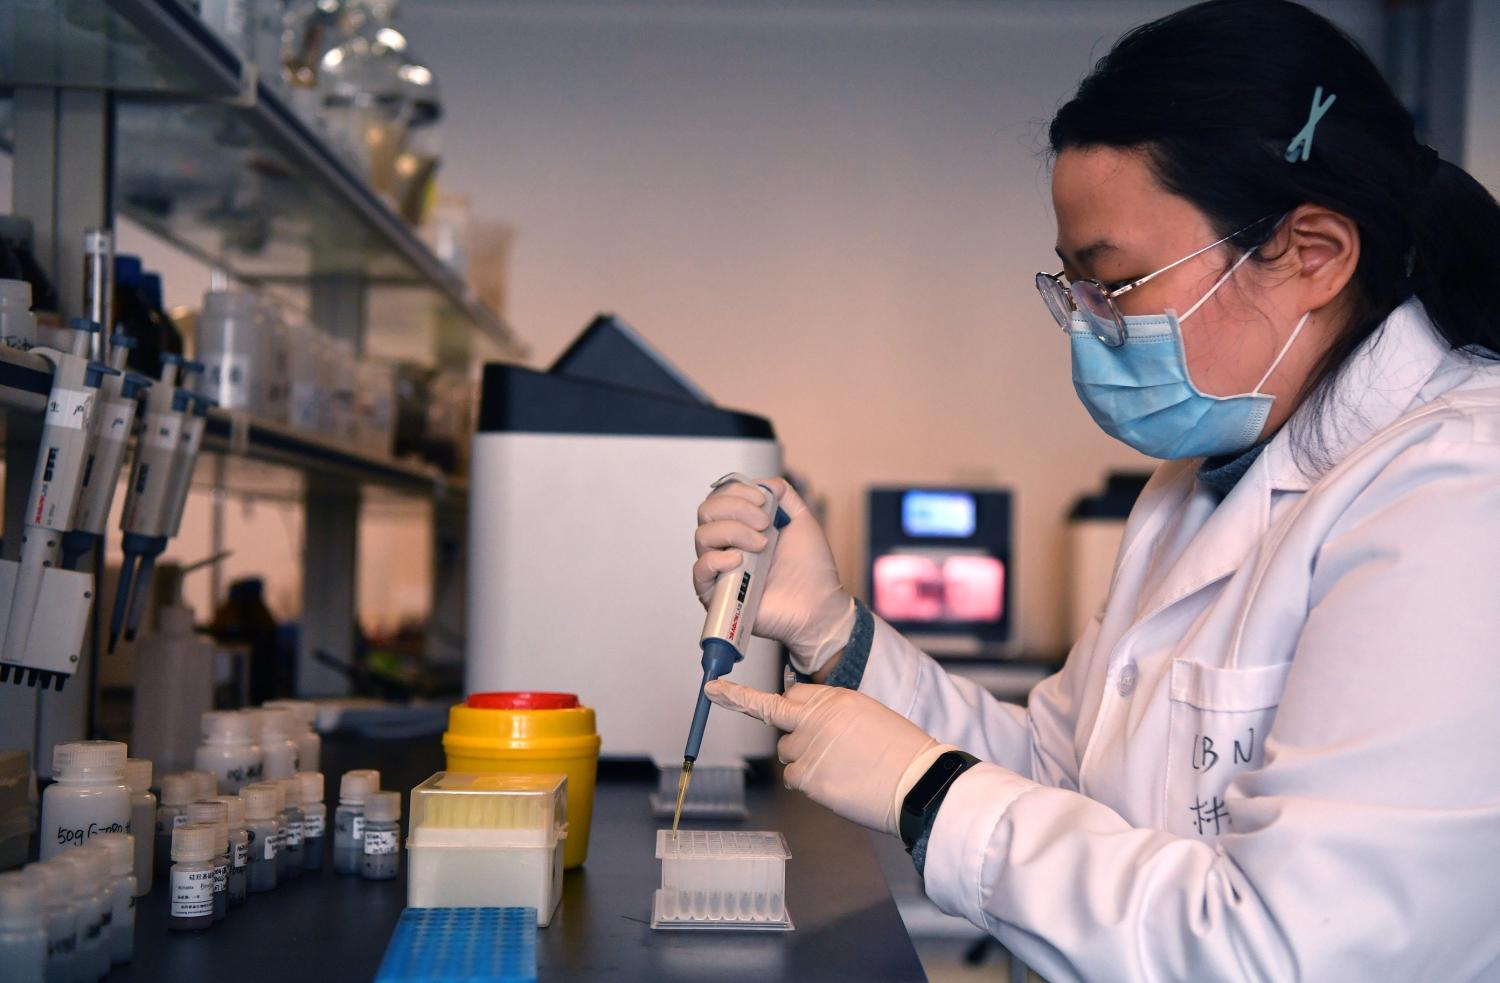 LUOYANG, CHINA- In the photos, staff works to produce the nucleic acid test kit at the Luoyang Ascend Biotechnology Co., Ltd plant in Luoyang, Henan Province in central China, March 4, 2020. To help combat The epidemic of the new coronavirus, the company is in full capacity producing nucleic acid test kits, after the increase of imported coronavirus cases in the country.